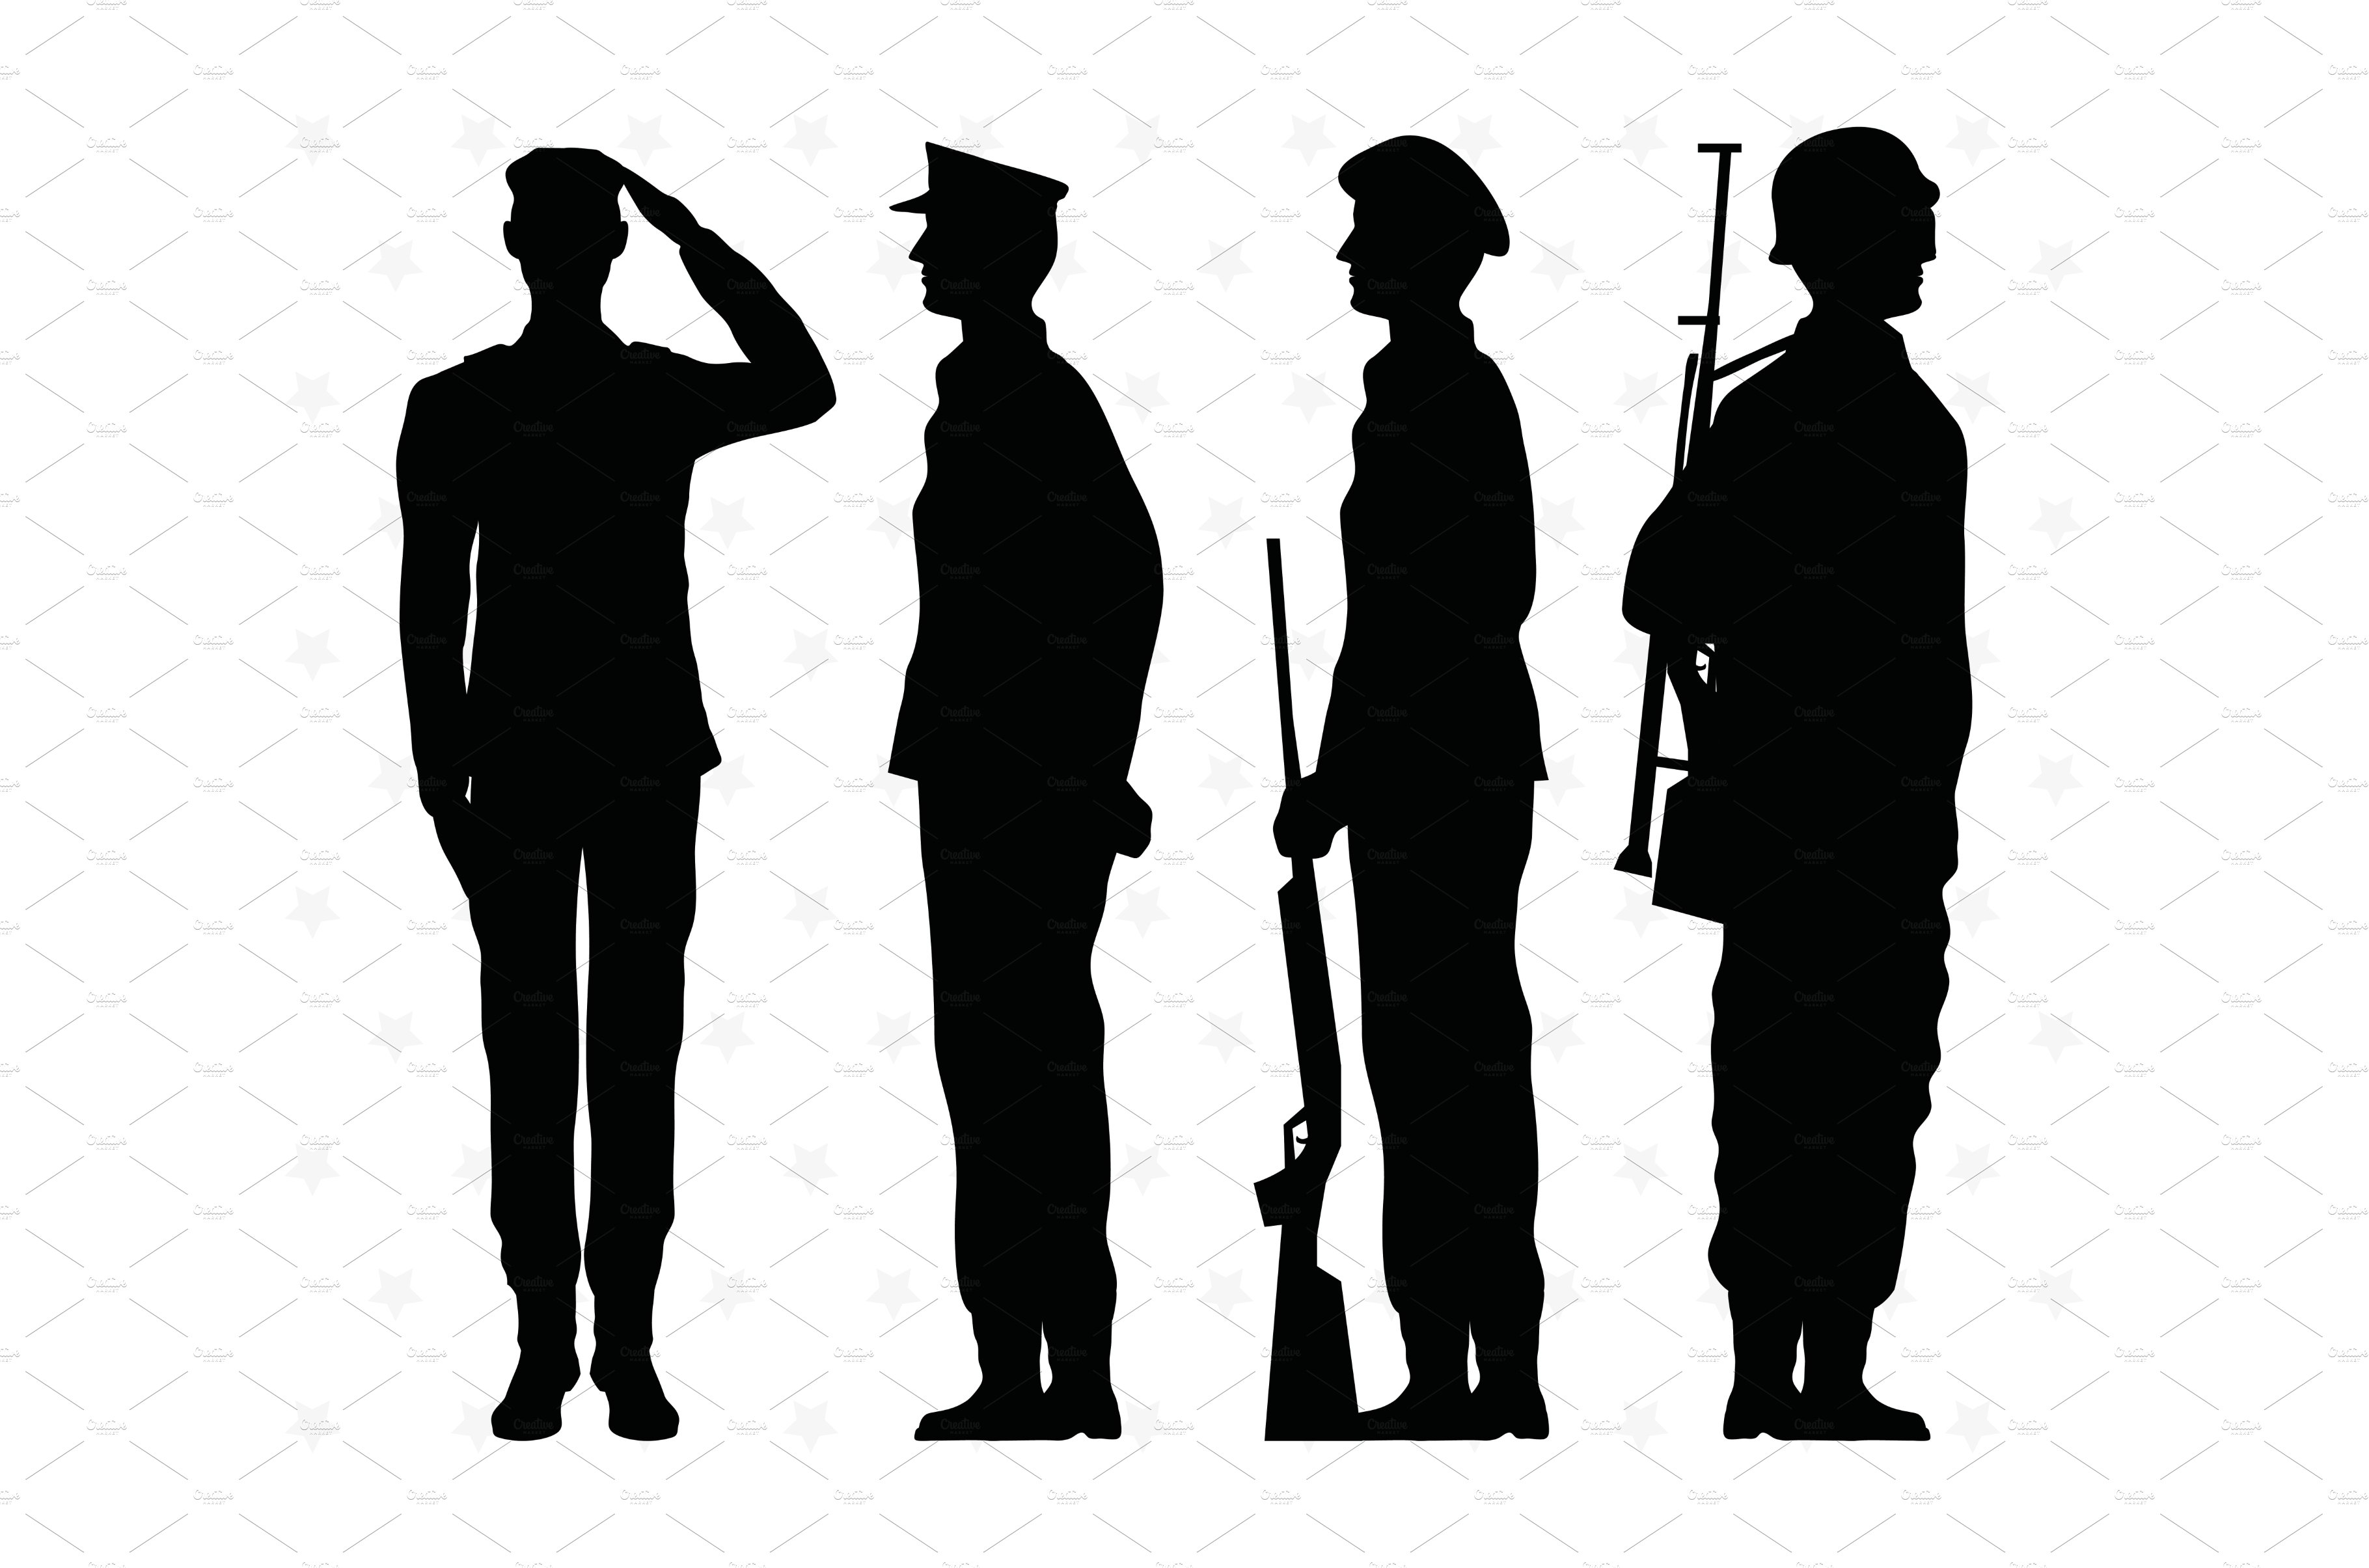 four soldiers silhouettes cover image.